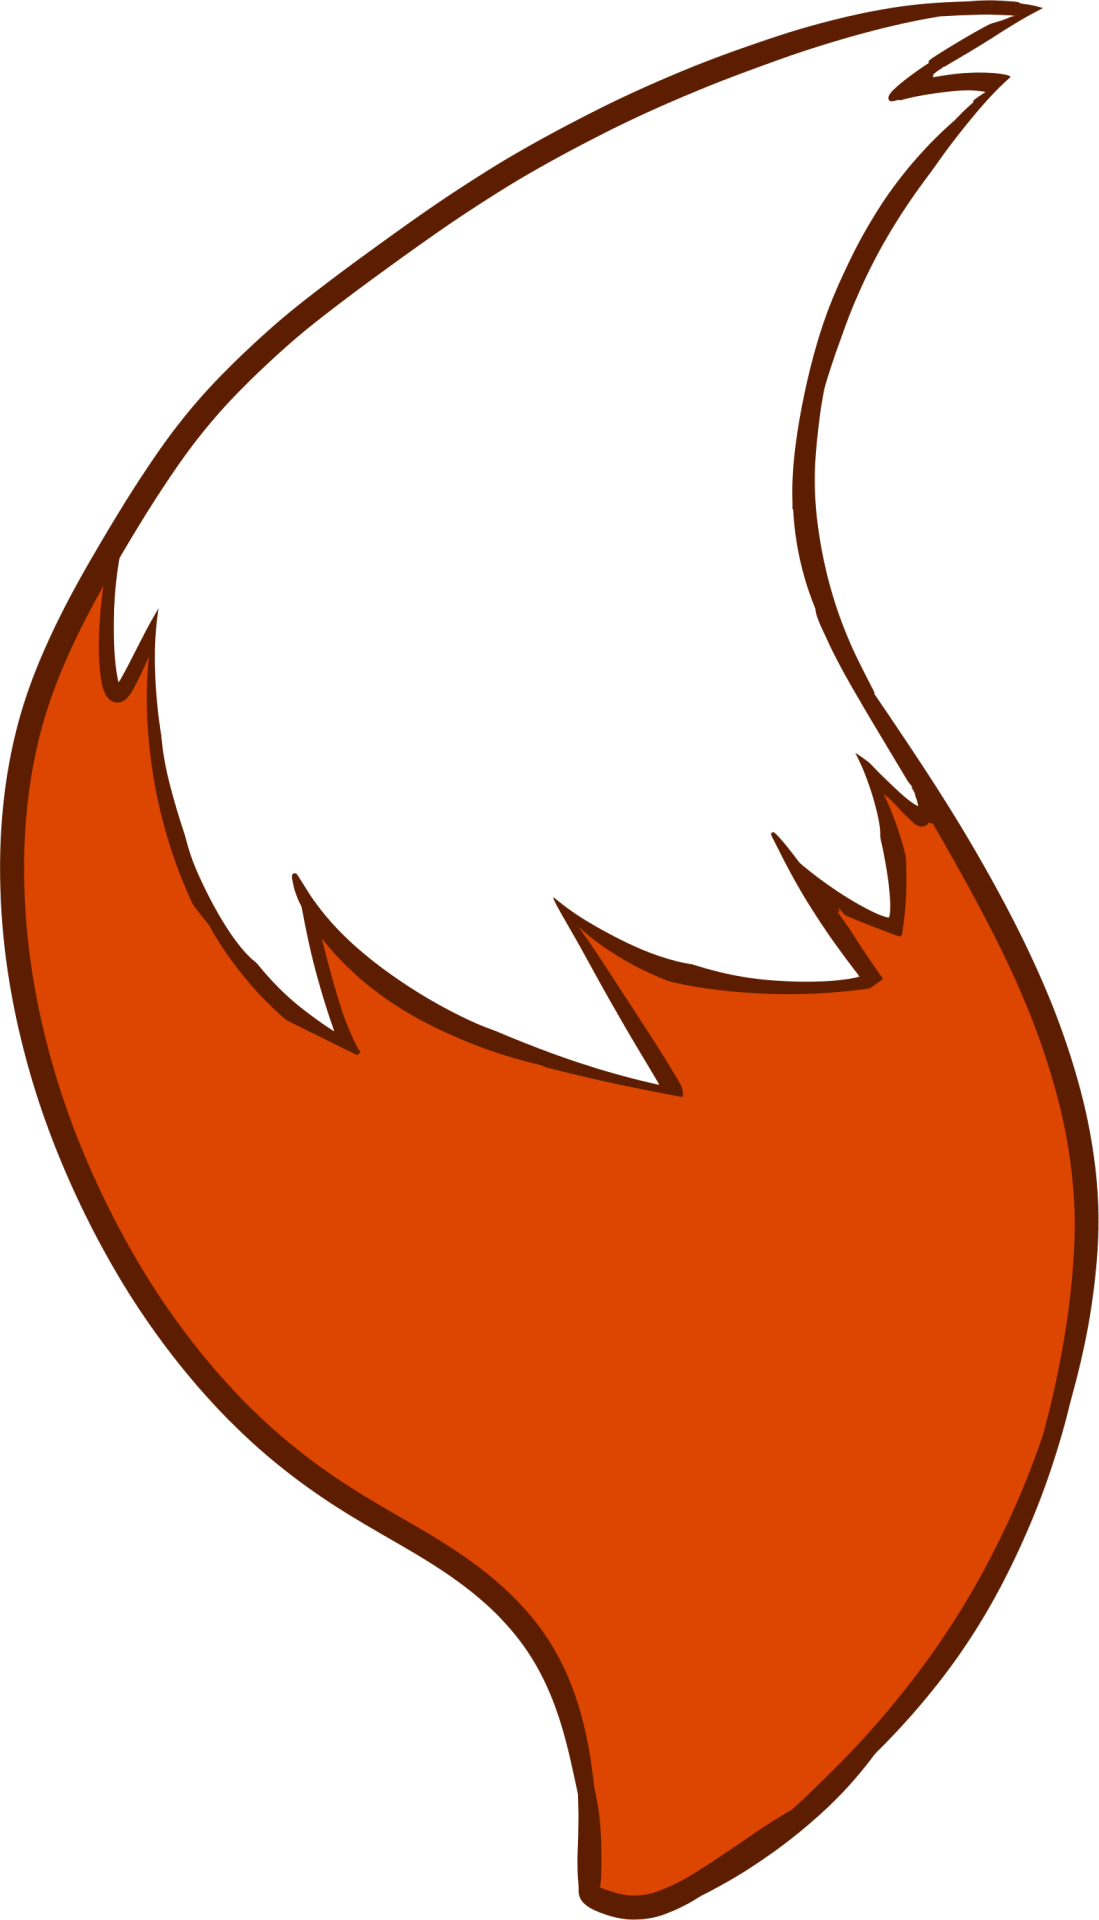 I Made Some Cute Little Fox Tail Stickers - Fox Tail Transparent (1099x1920)